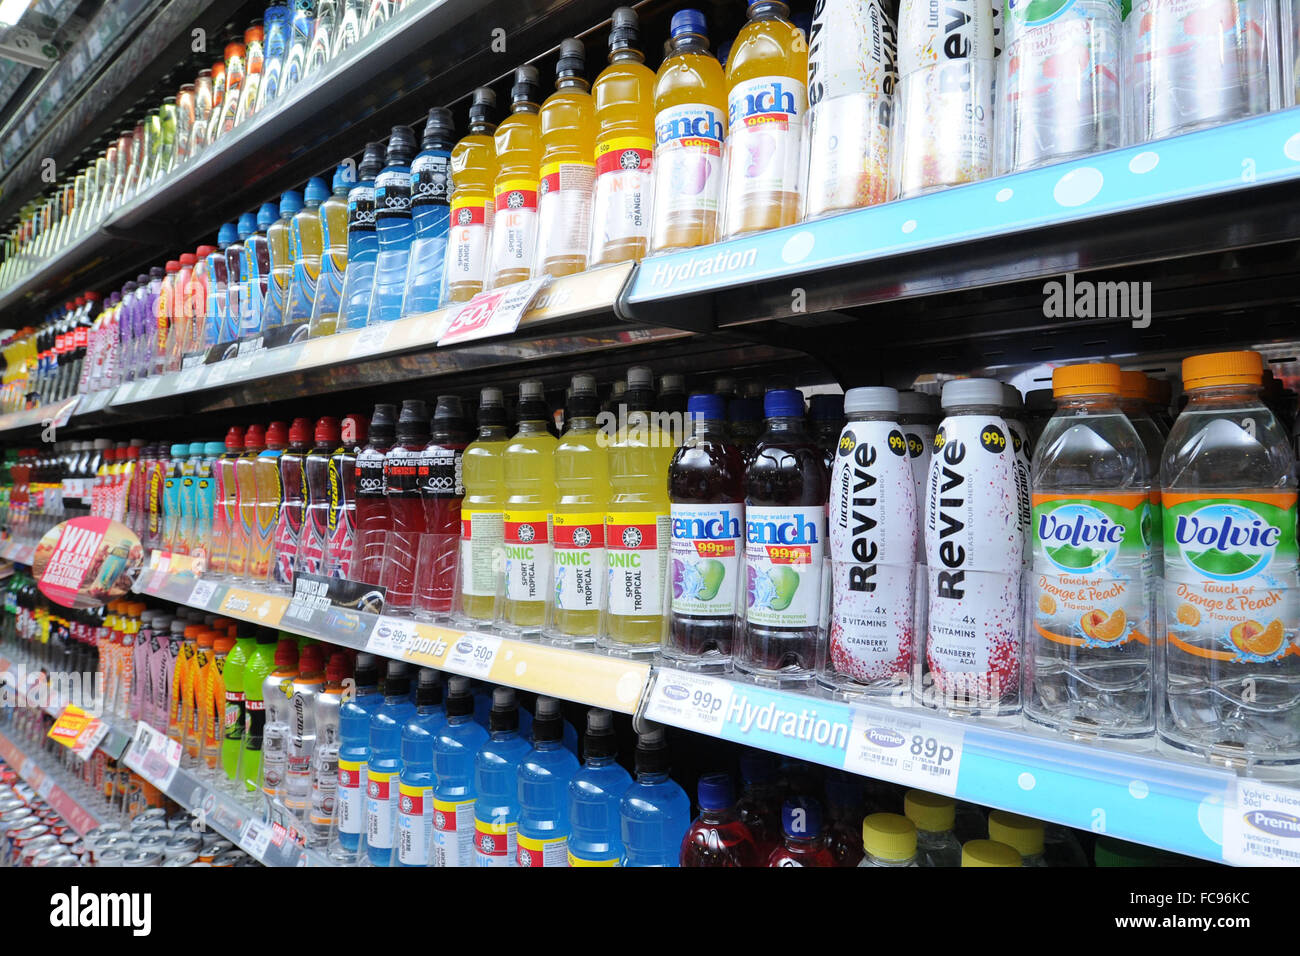 Fizzy carbonated soft drinks for sale in a shop. Sugary fizzy drinks cause diabetes, tooth decay and heart disease. Stock Photo